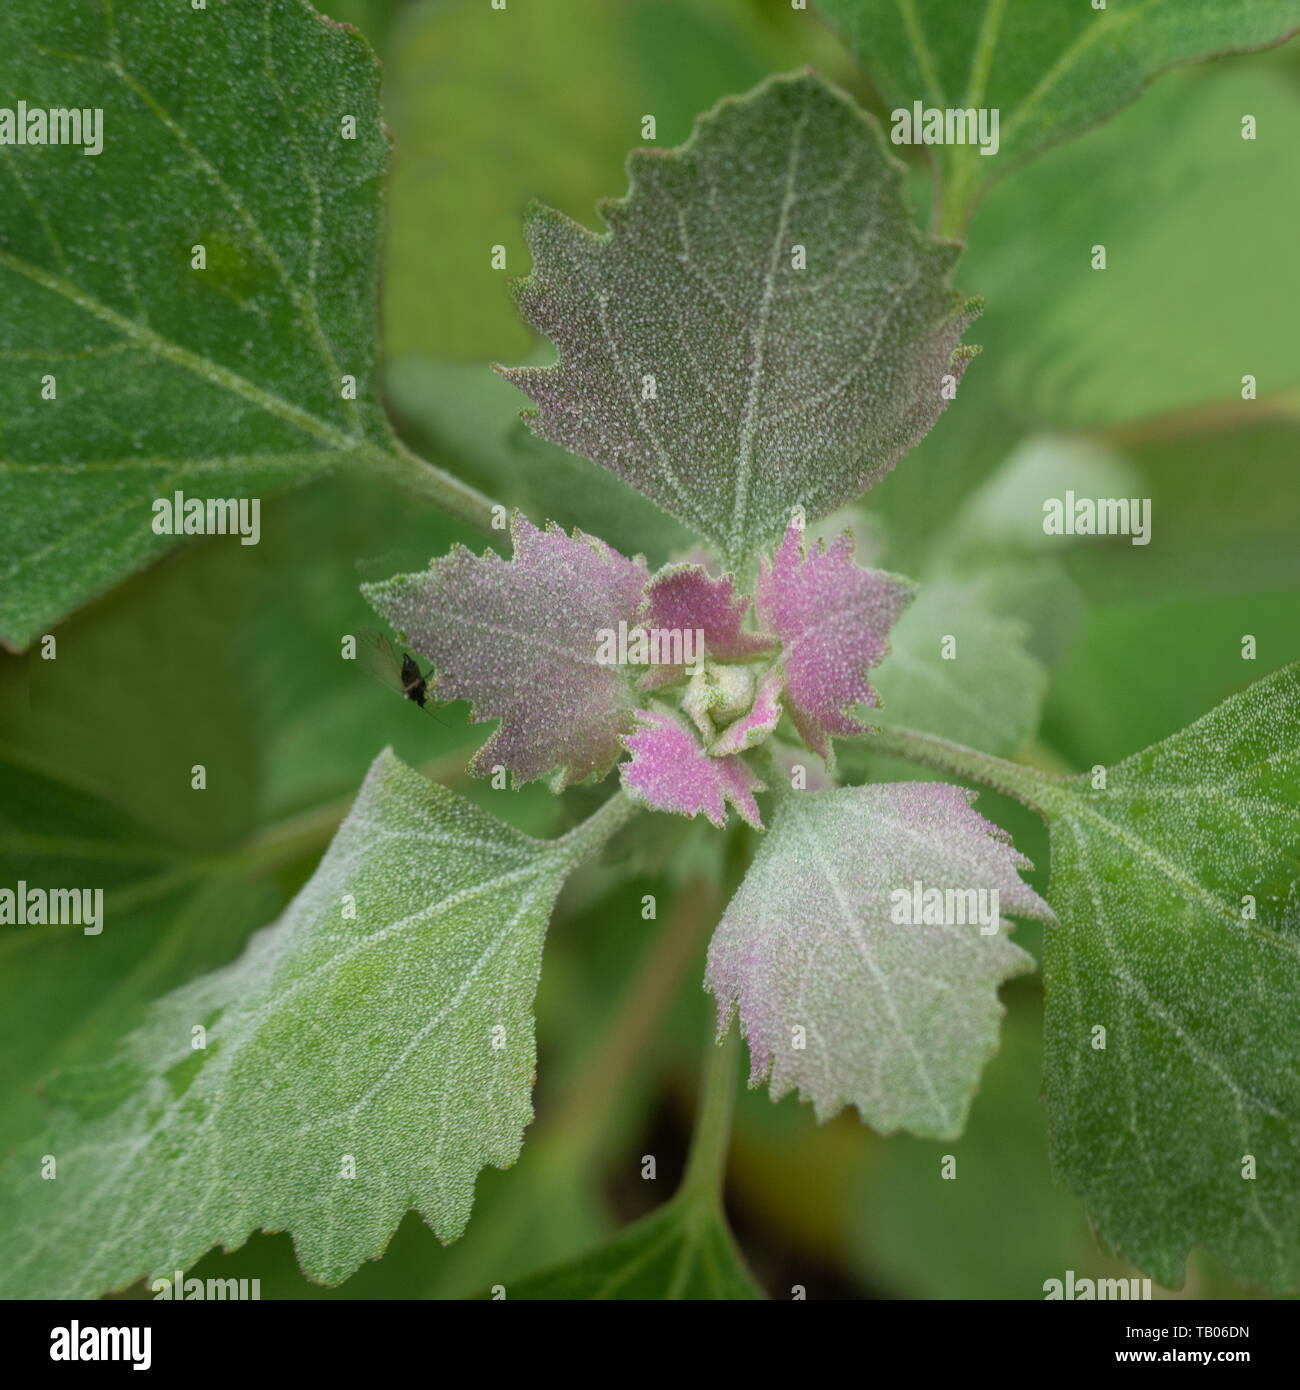 Green and pink mint leaves from above Stock Photo